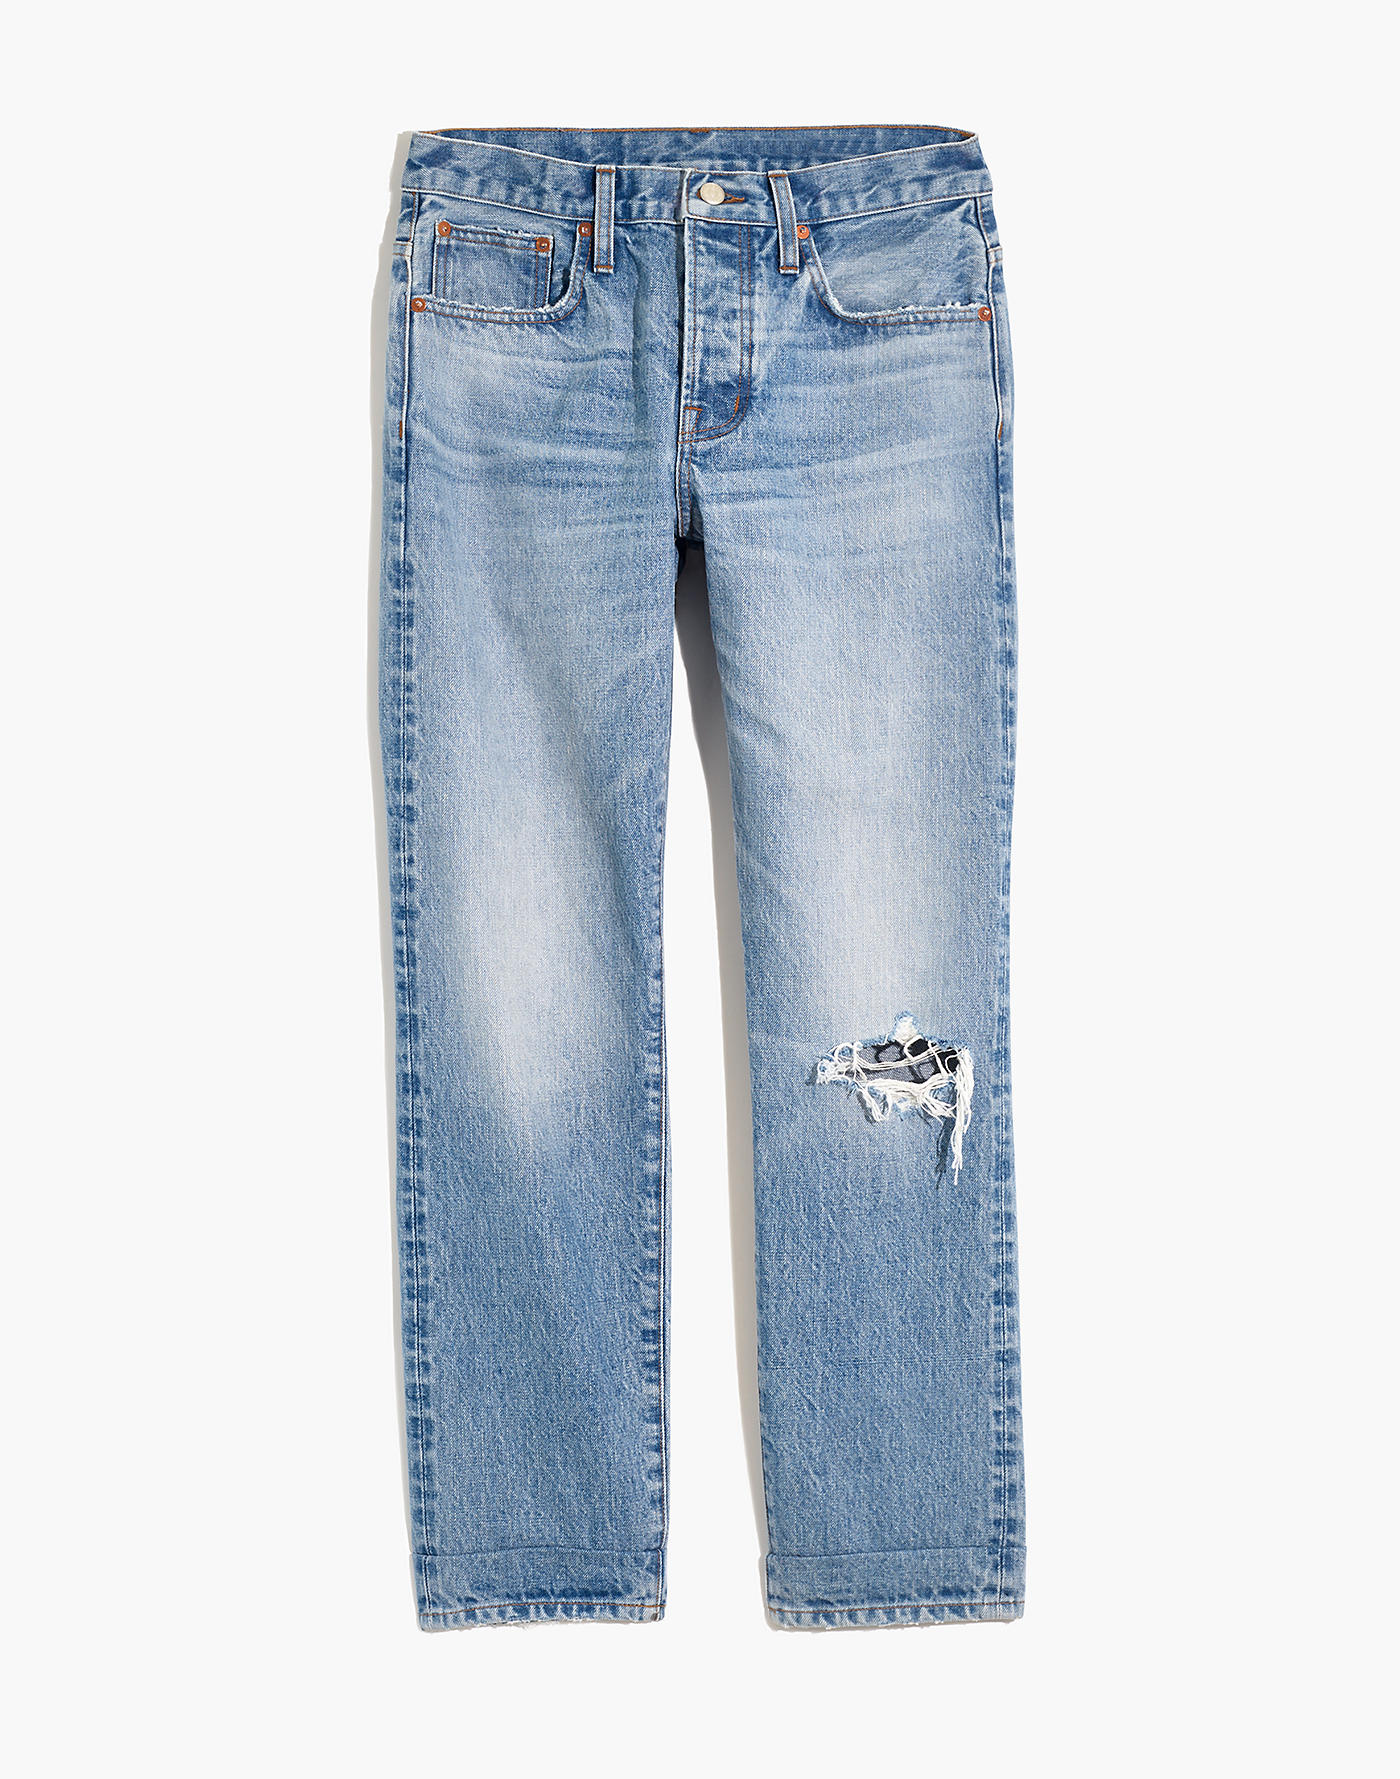 Madewell Rivet & Thread Low-Rise Vintage Straight Jeans: Selvedge Edition